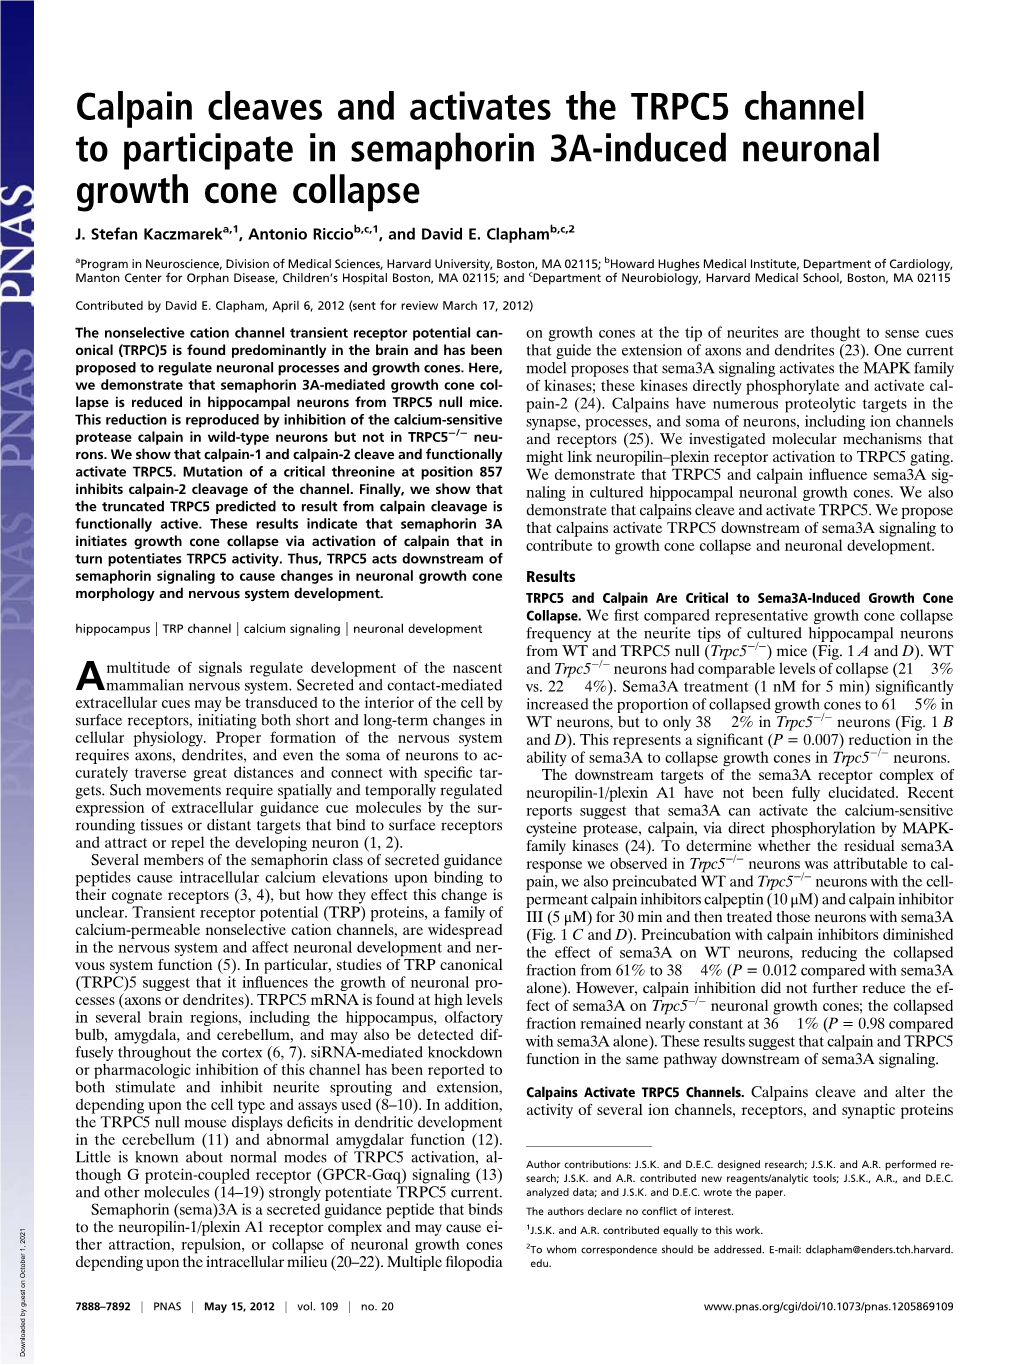 Calpain Cleaves and Activates the TRPC5 Channel to Participate in Semaphorin 3A-Induced Neuronal Growth Cone Collapse